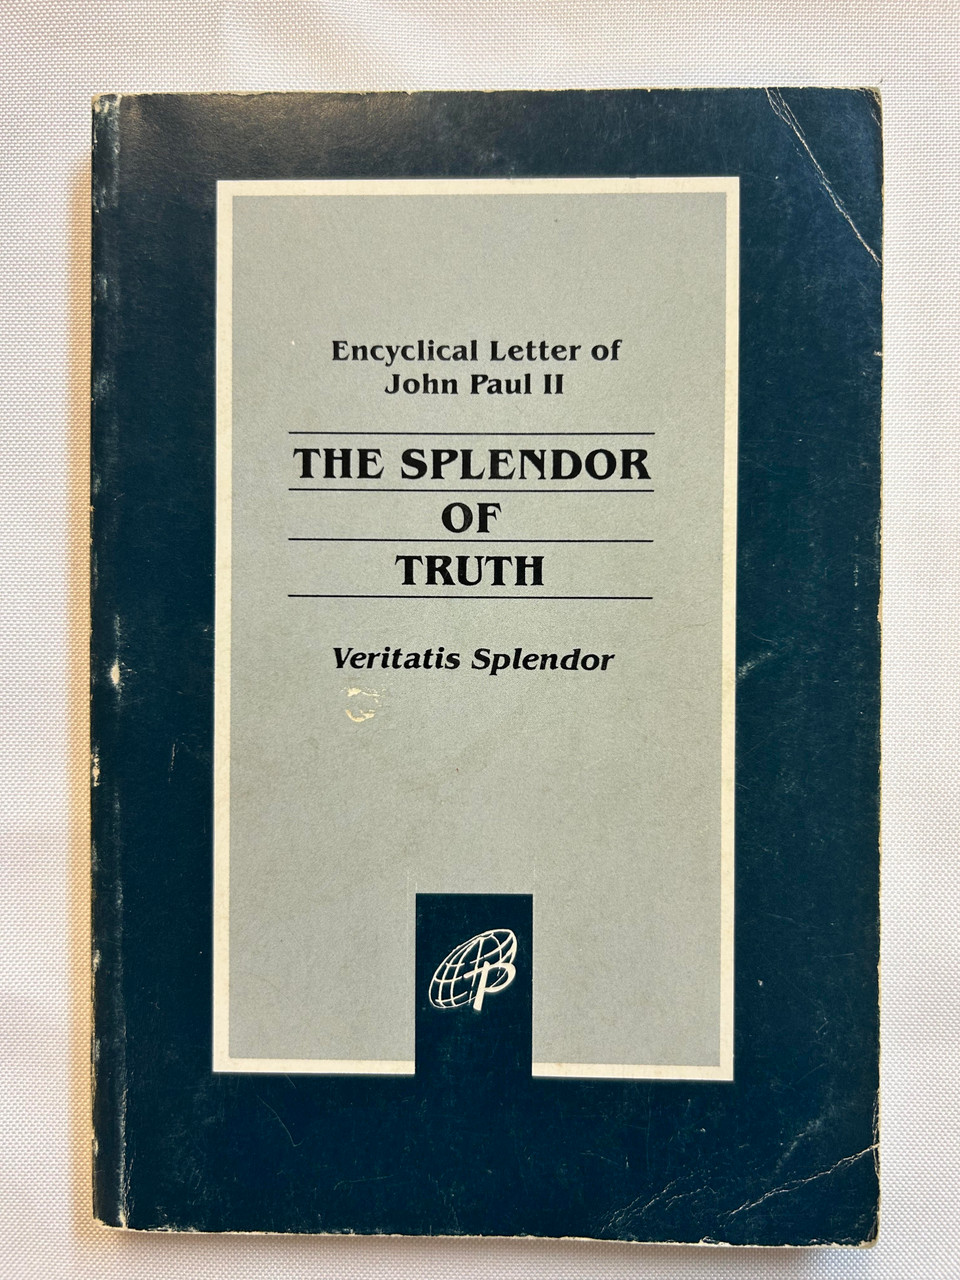 Saint Pope John Paul II's encyclical The Splendor of Truth (Veritas Splendor). 

This is a used book and is sold as is. It may contain markings from a previous owner.